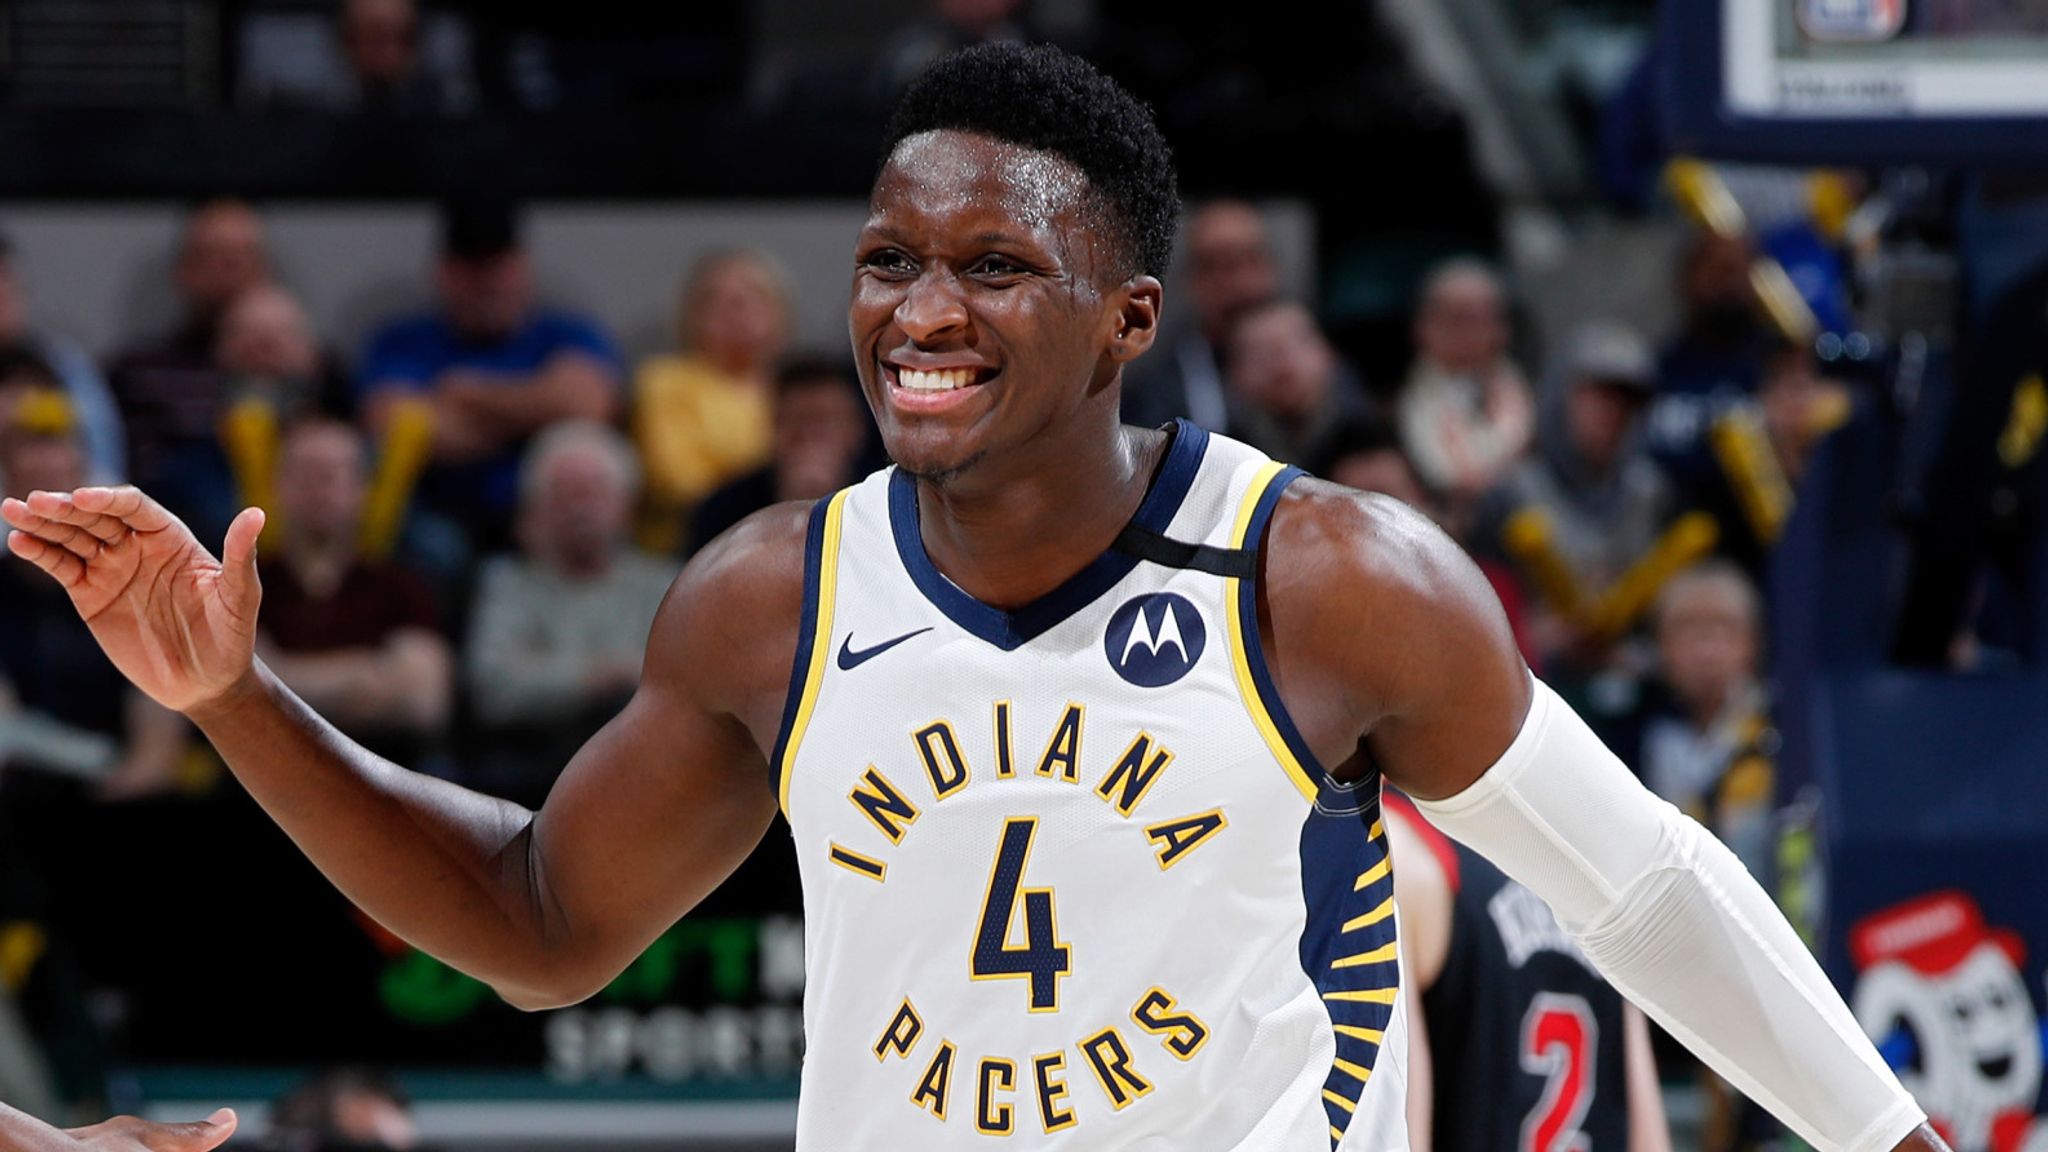 Victor Oladipo revises routine in bid to remain ready for NBA